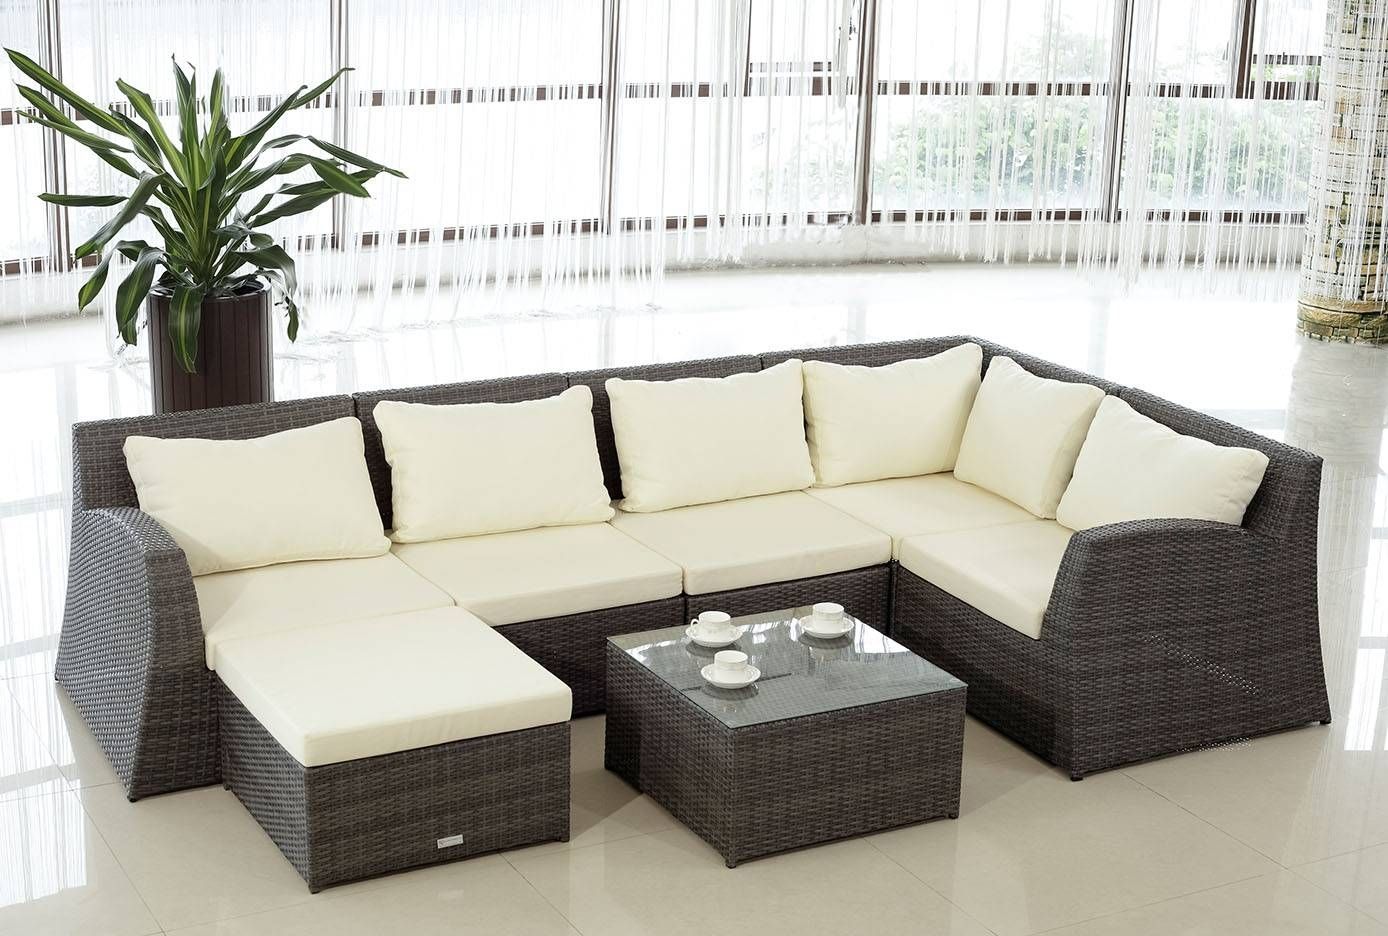 Architectural Design Modern Rattan Outdoor Furniture Architecture Regarding Modern Rattan Sofas (View 4 of 30)